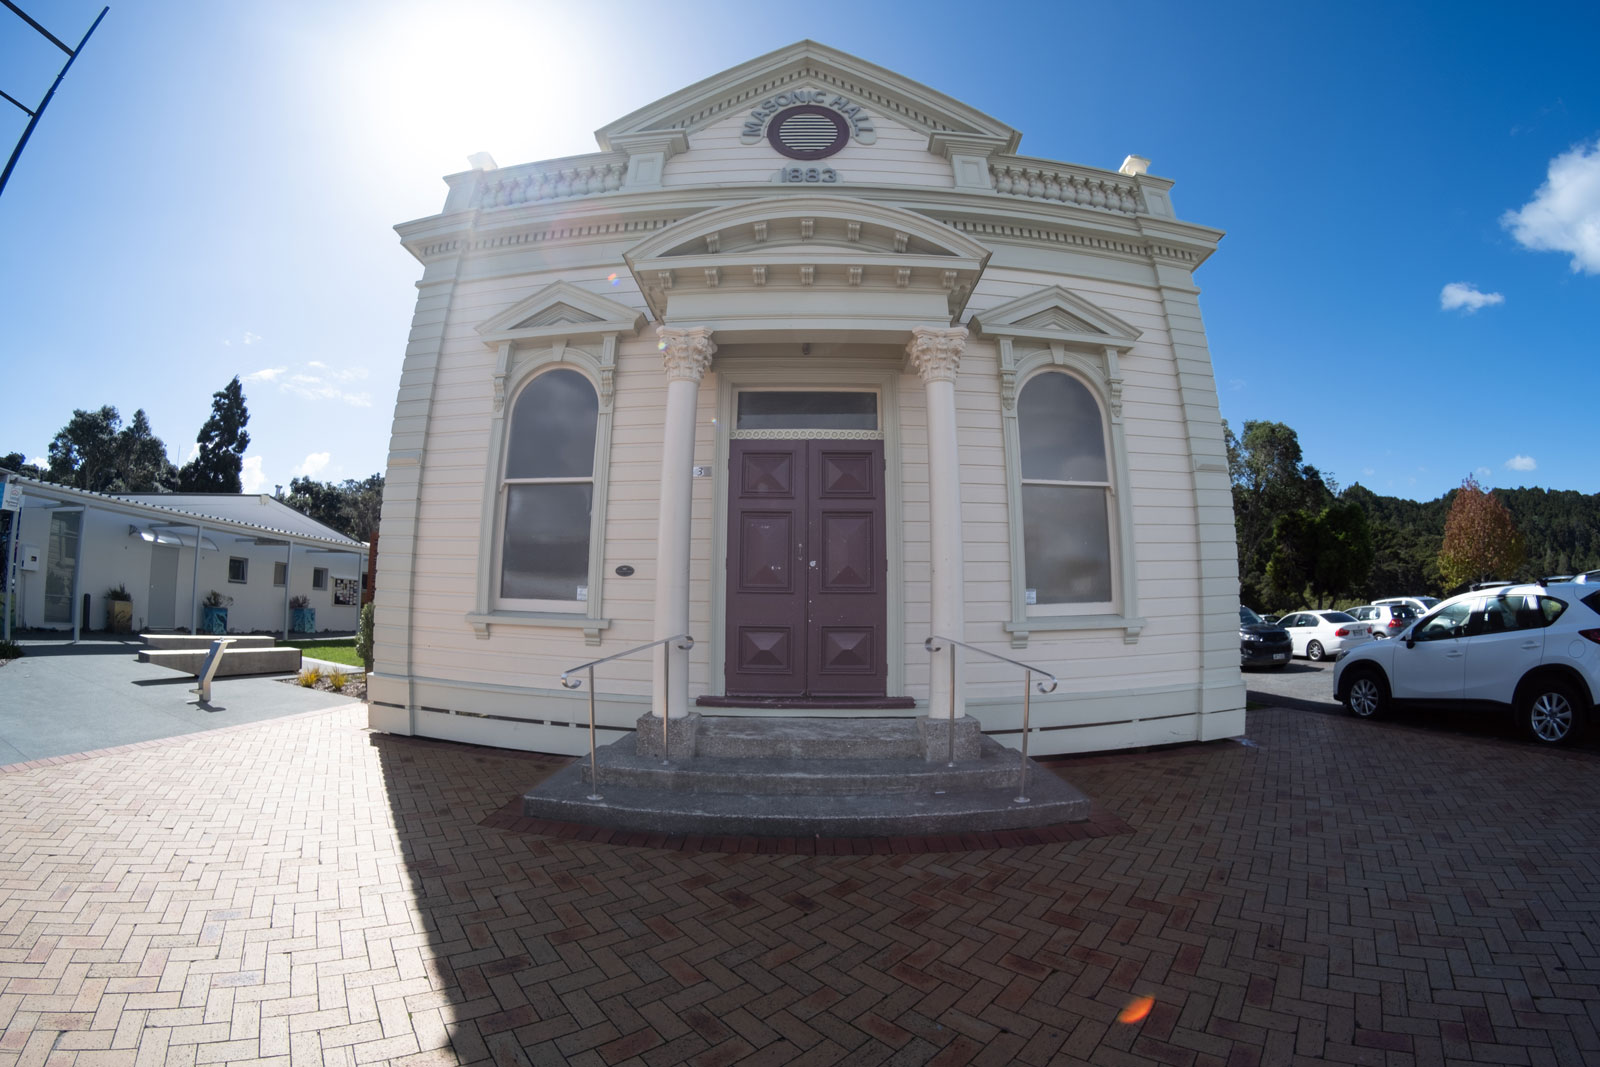 The Masonic Hall, Warkworth, North Auckland, New Zealand | Tokina SZ 8mm F2.8 E FISH-EYE | Notice that the frame was taken a few metres away. The structure's lines are curved, however, the central lines keep on their straightness